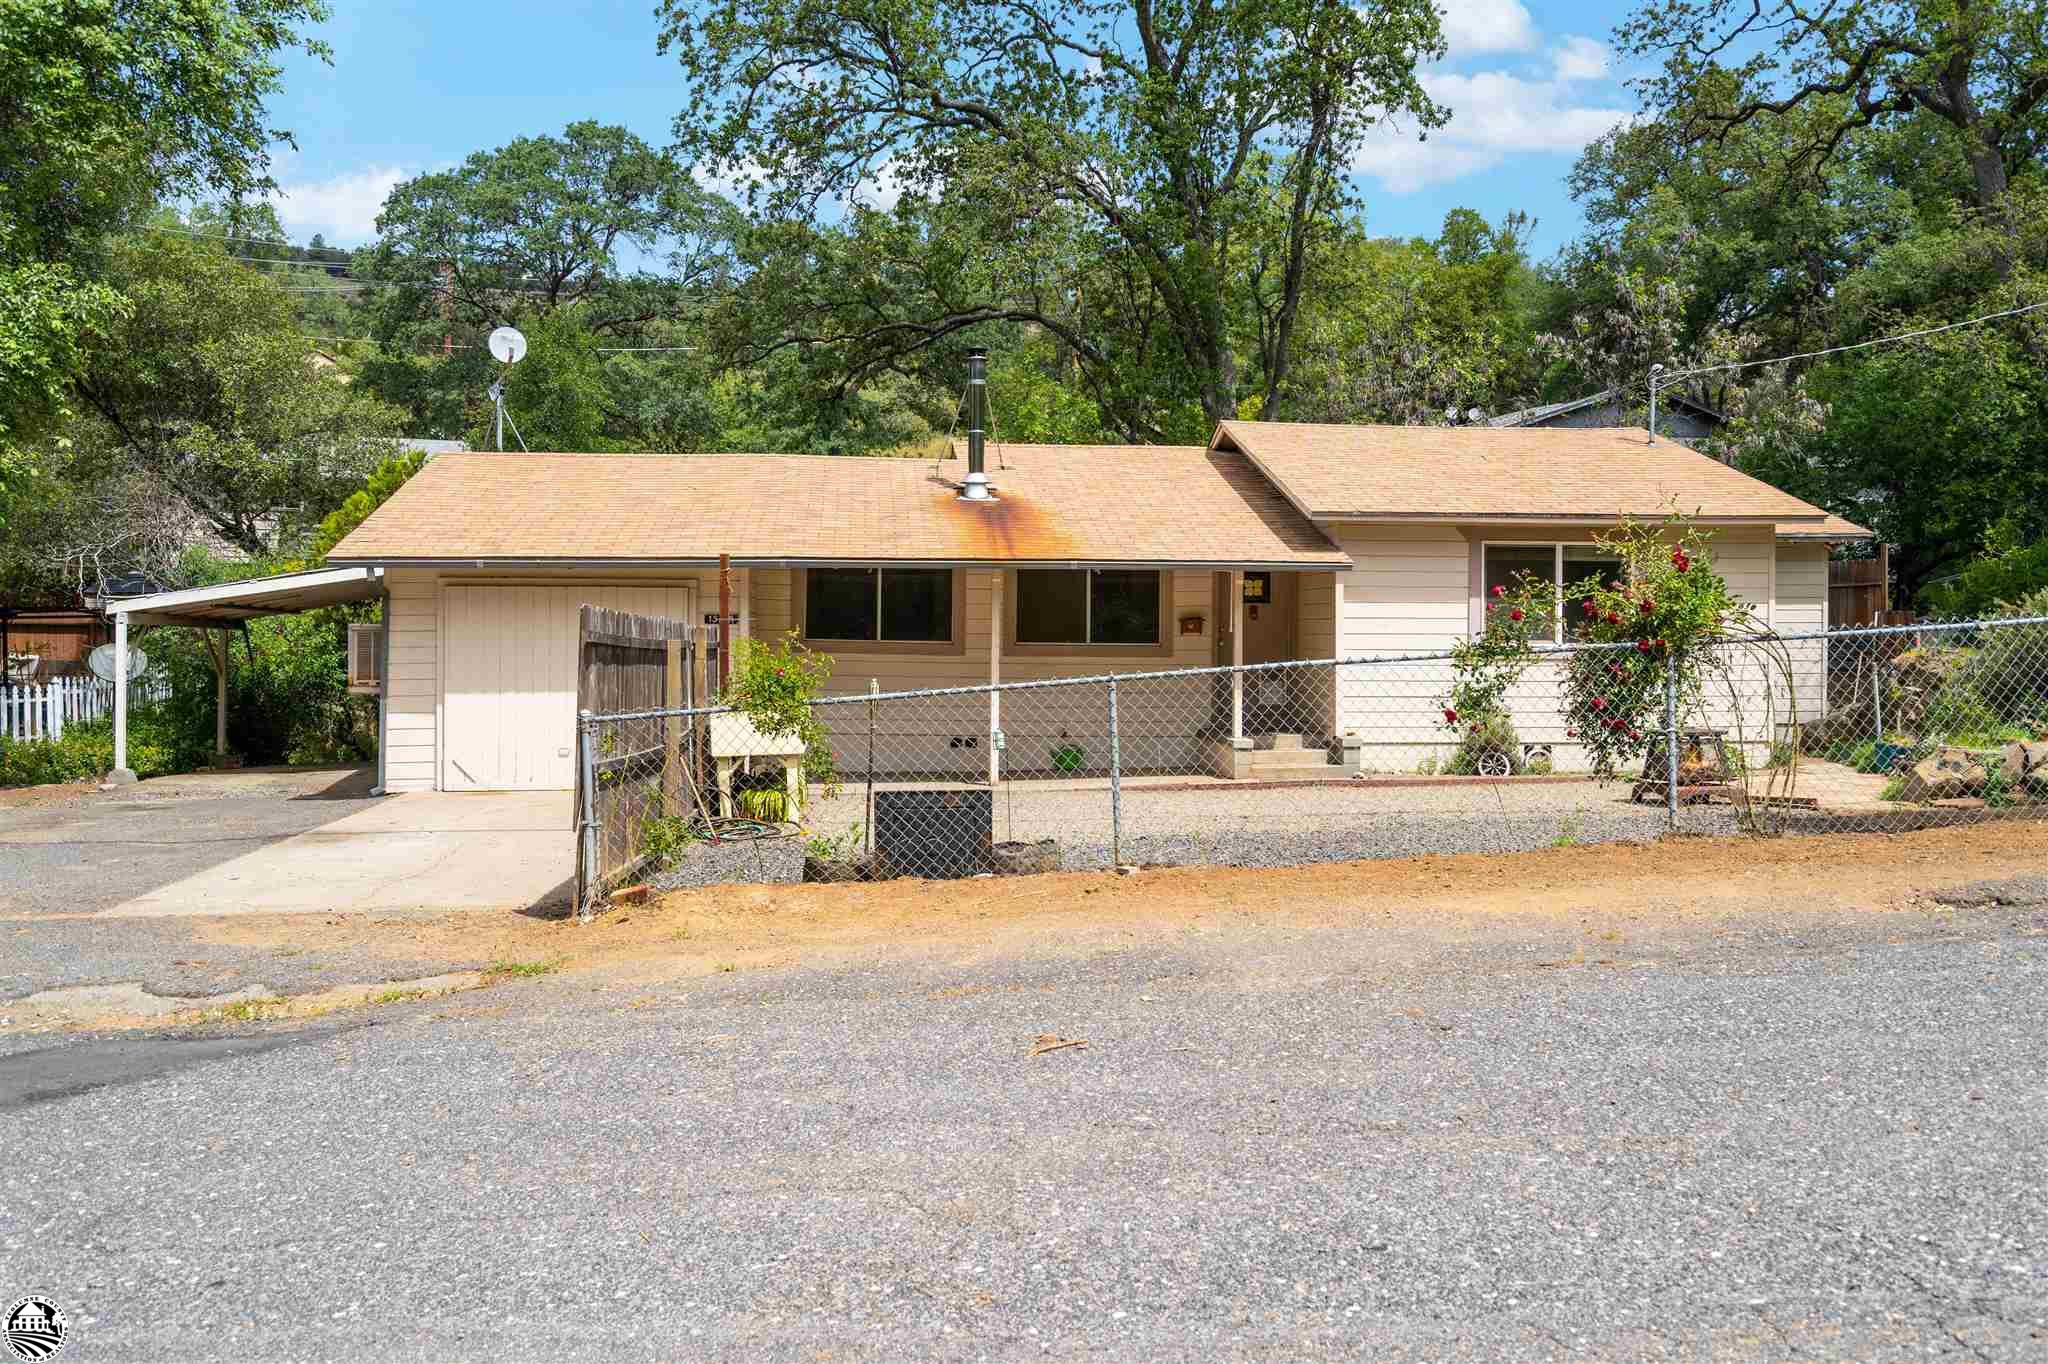 Great opportunity on this Value Priced Diamond in the Rough in The Sierra Foothills. There are 2 bedrooms, 1 full bath and a garage conversion/bonus room in this level entry home on  .27 acres within 2 plus hours of most bay area locations.  You’ll really love the interesting rock garden at the front of the fenced yard and the fact that the home is on well water and district sewer. There are mature shade trees, a pear tree... no partridge on the property, an herb garden, a fire pit, a spacious side garden with a storage shed, a level parking area with a RV parking place. Nine minutes from historic downtown Sonora. Splash in Pinecrest lake in the summertime and ski at Dodge Ridge in the winter just minutes away.